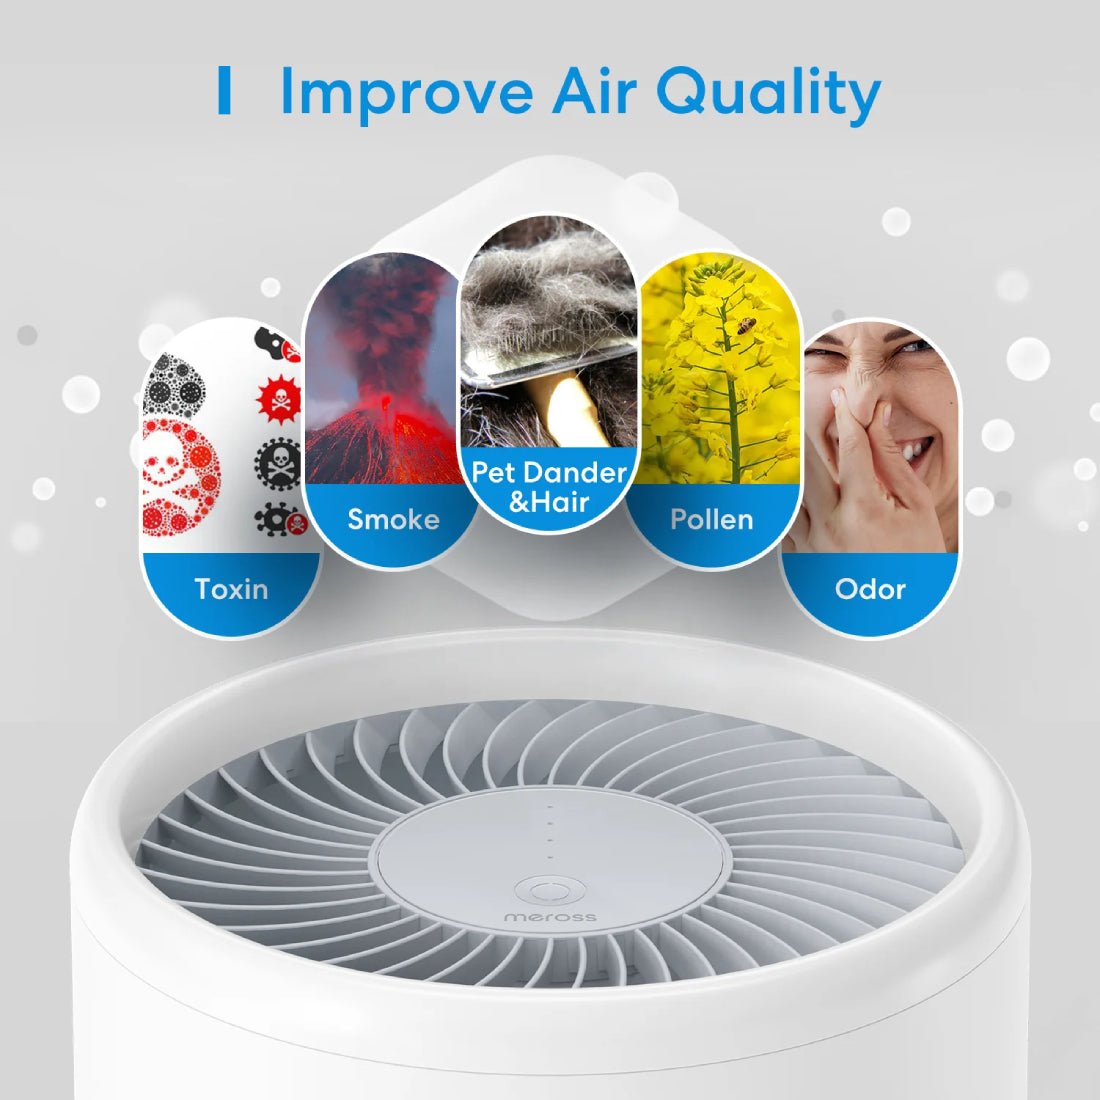 Meross Smart 3-Stage H13 HEPA Air Purifier Filter - فلتر - Store 974 | ستور ٩٧٤